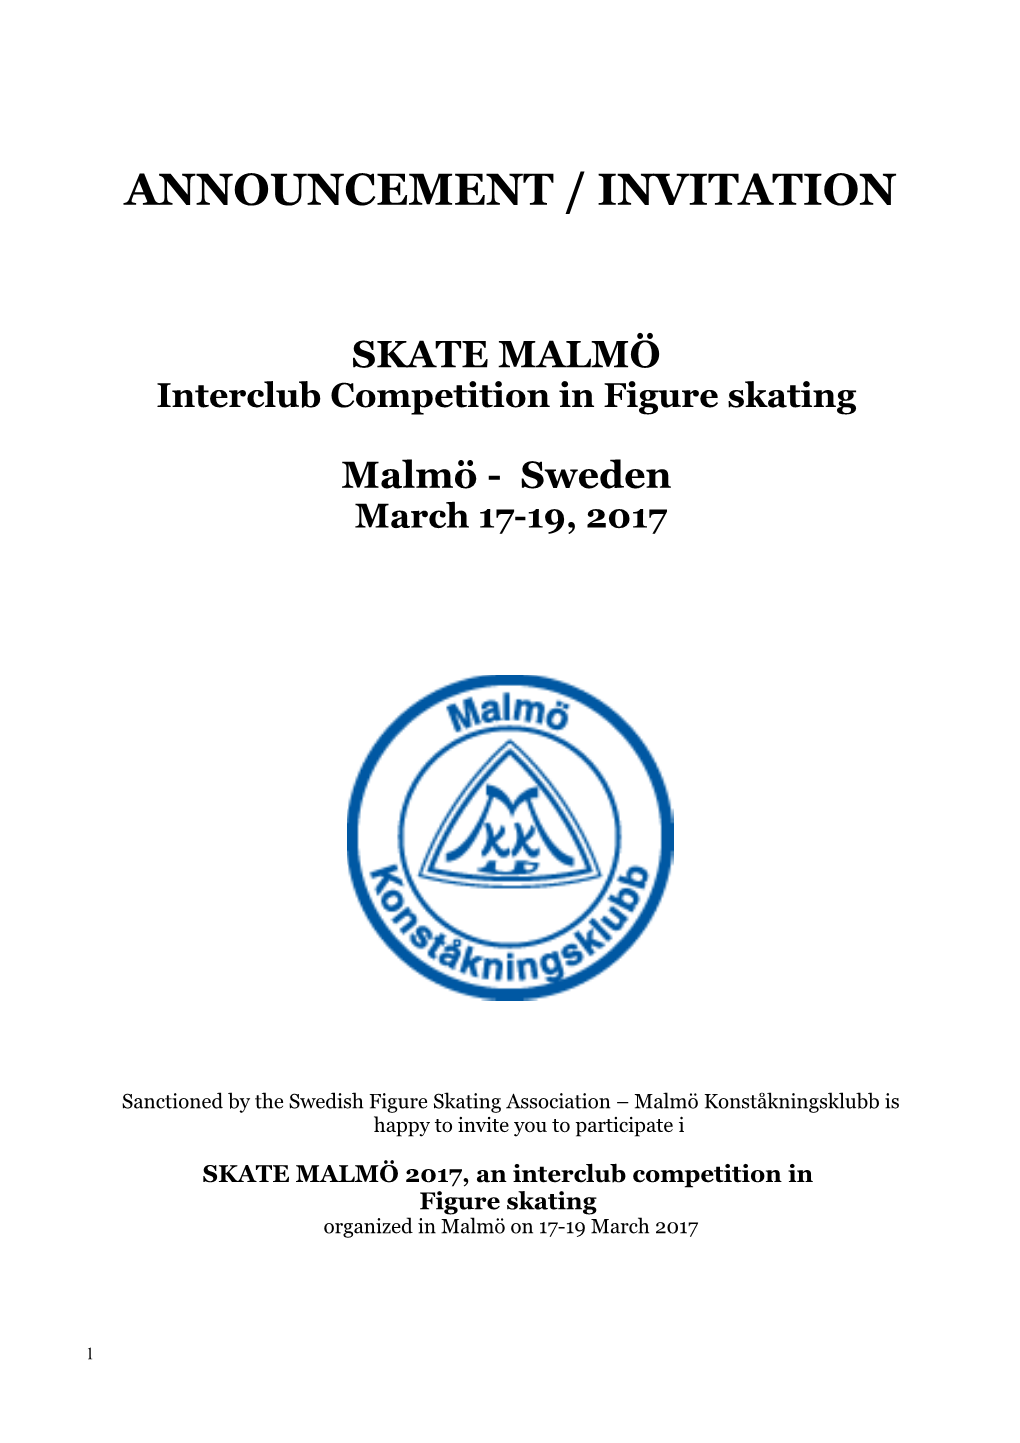 Interclub Competition in Figure Skating